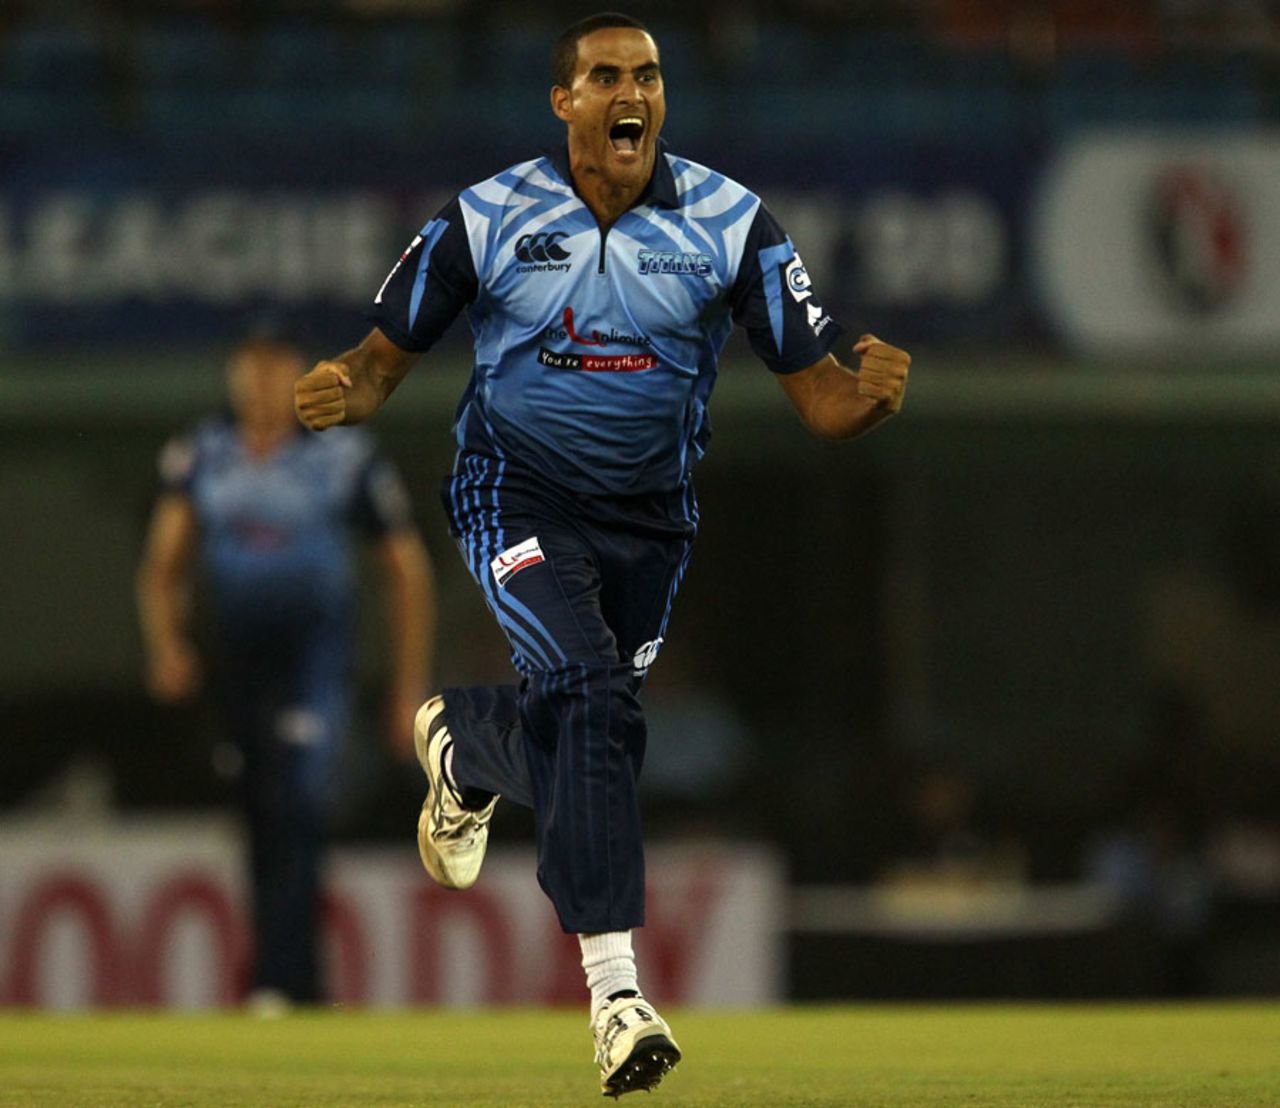 Rowan Richards exults after taking a wicket, Brisbane Heat v Titans, Group B, Champions League 2013, Mohali, September 24, 2013